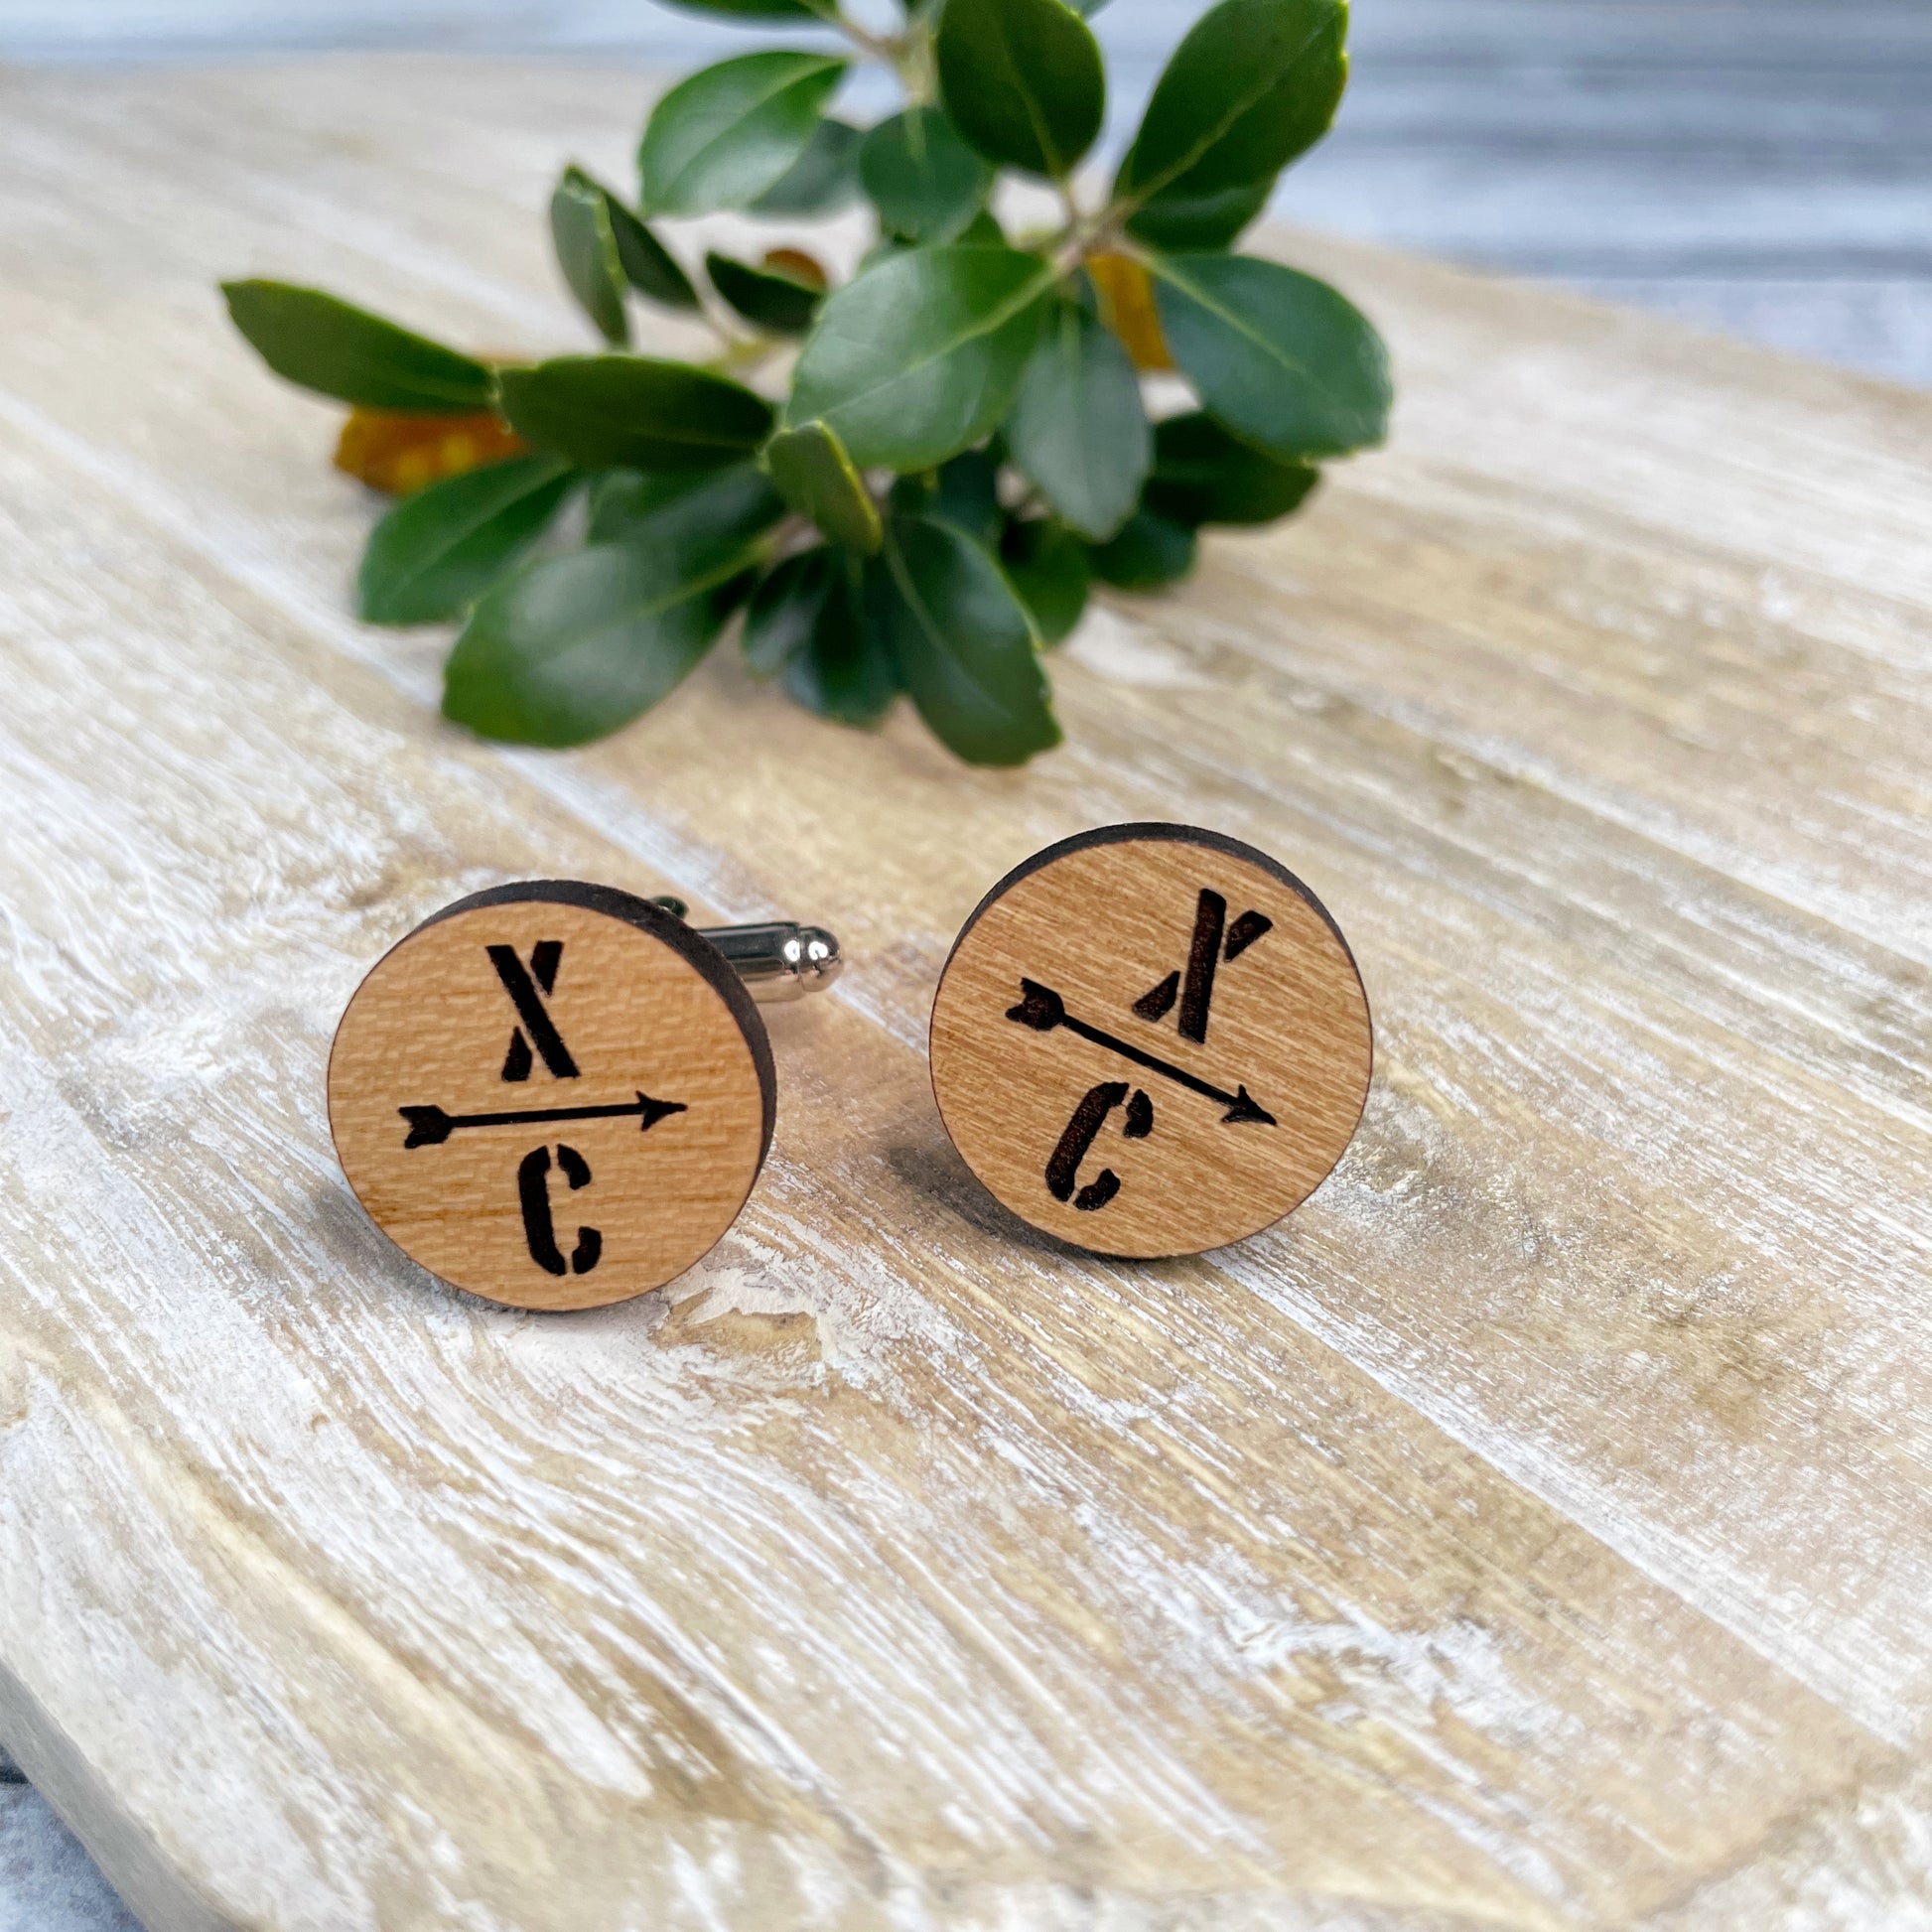 Engraved wood cufflinks for Cross Country runners, athletes